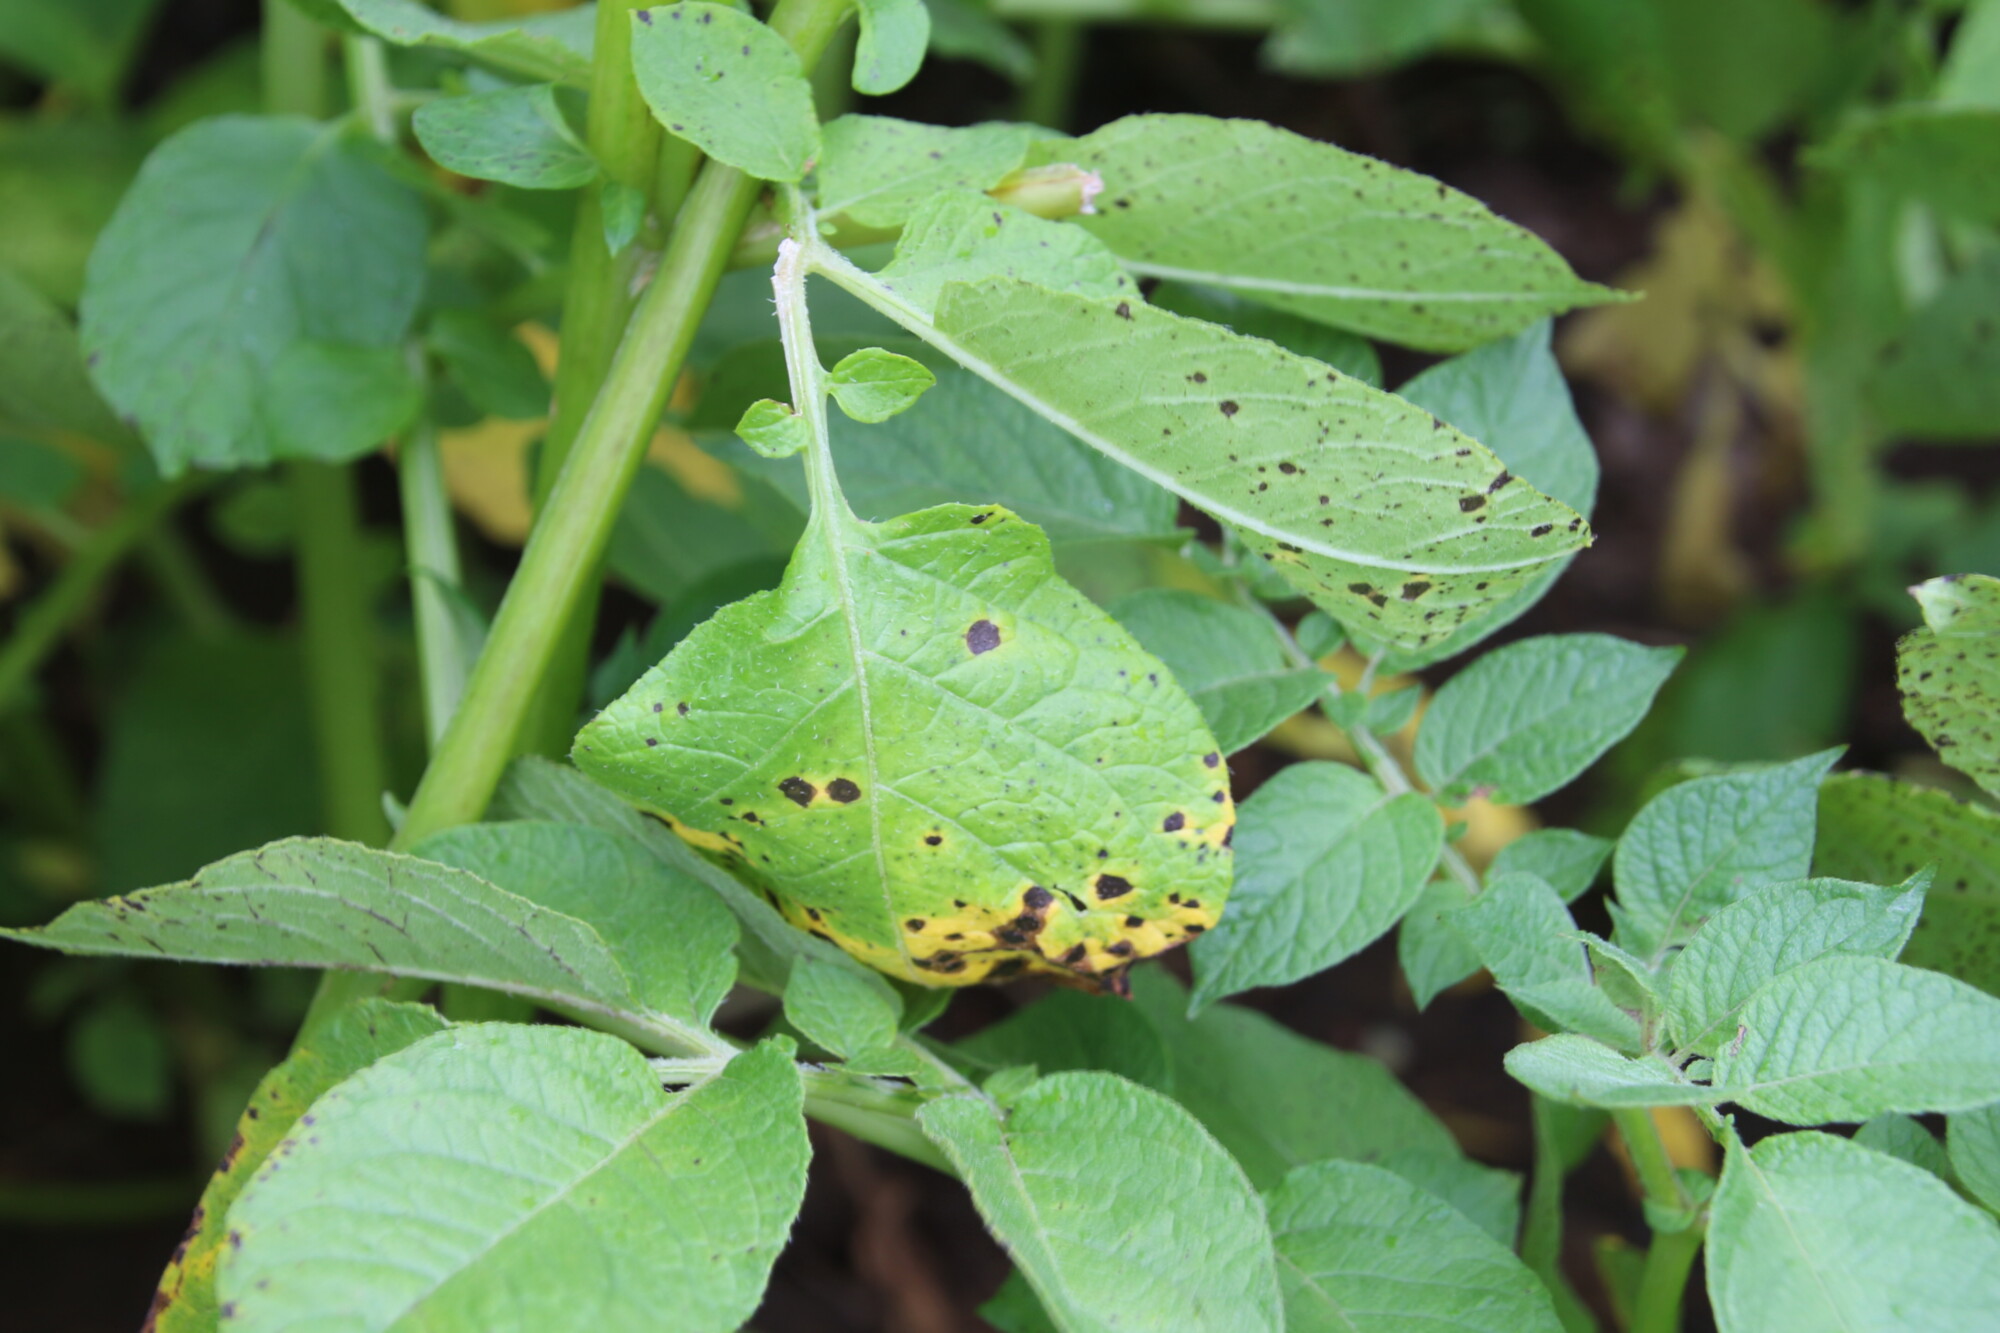 Alternaria now a significant threat 